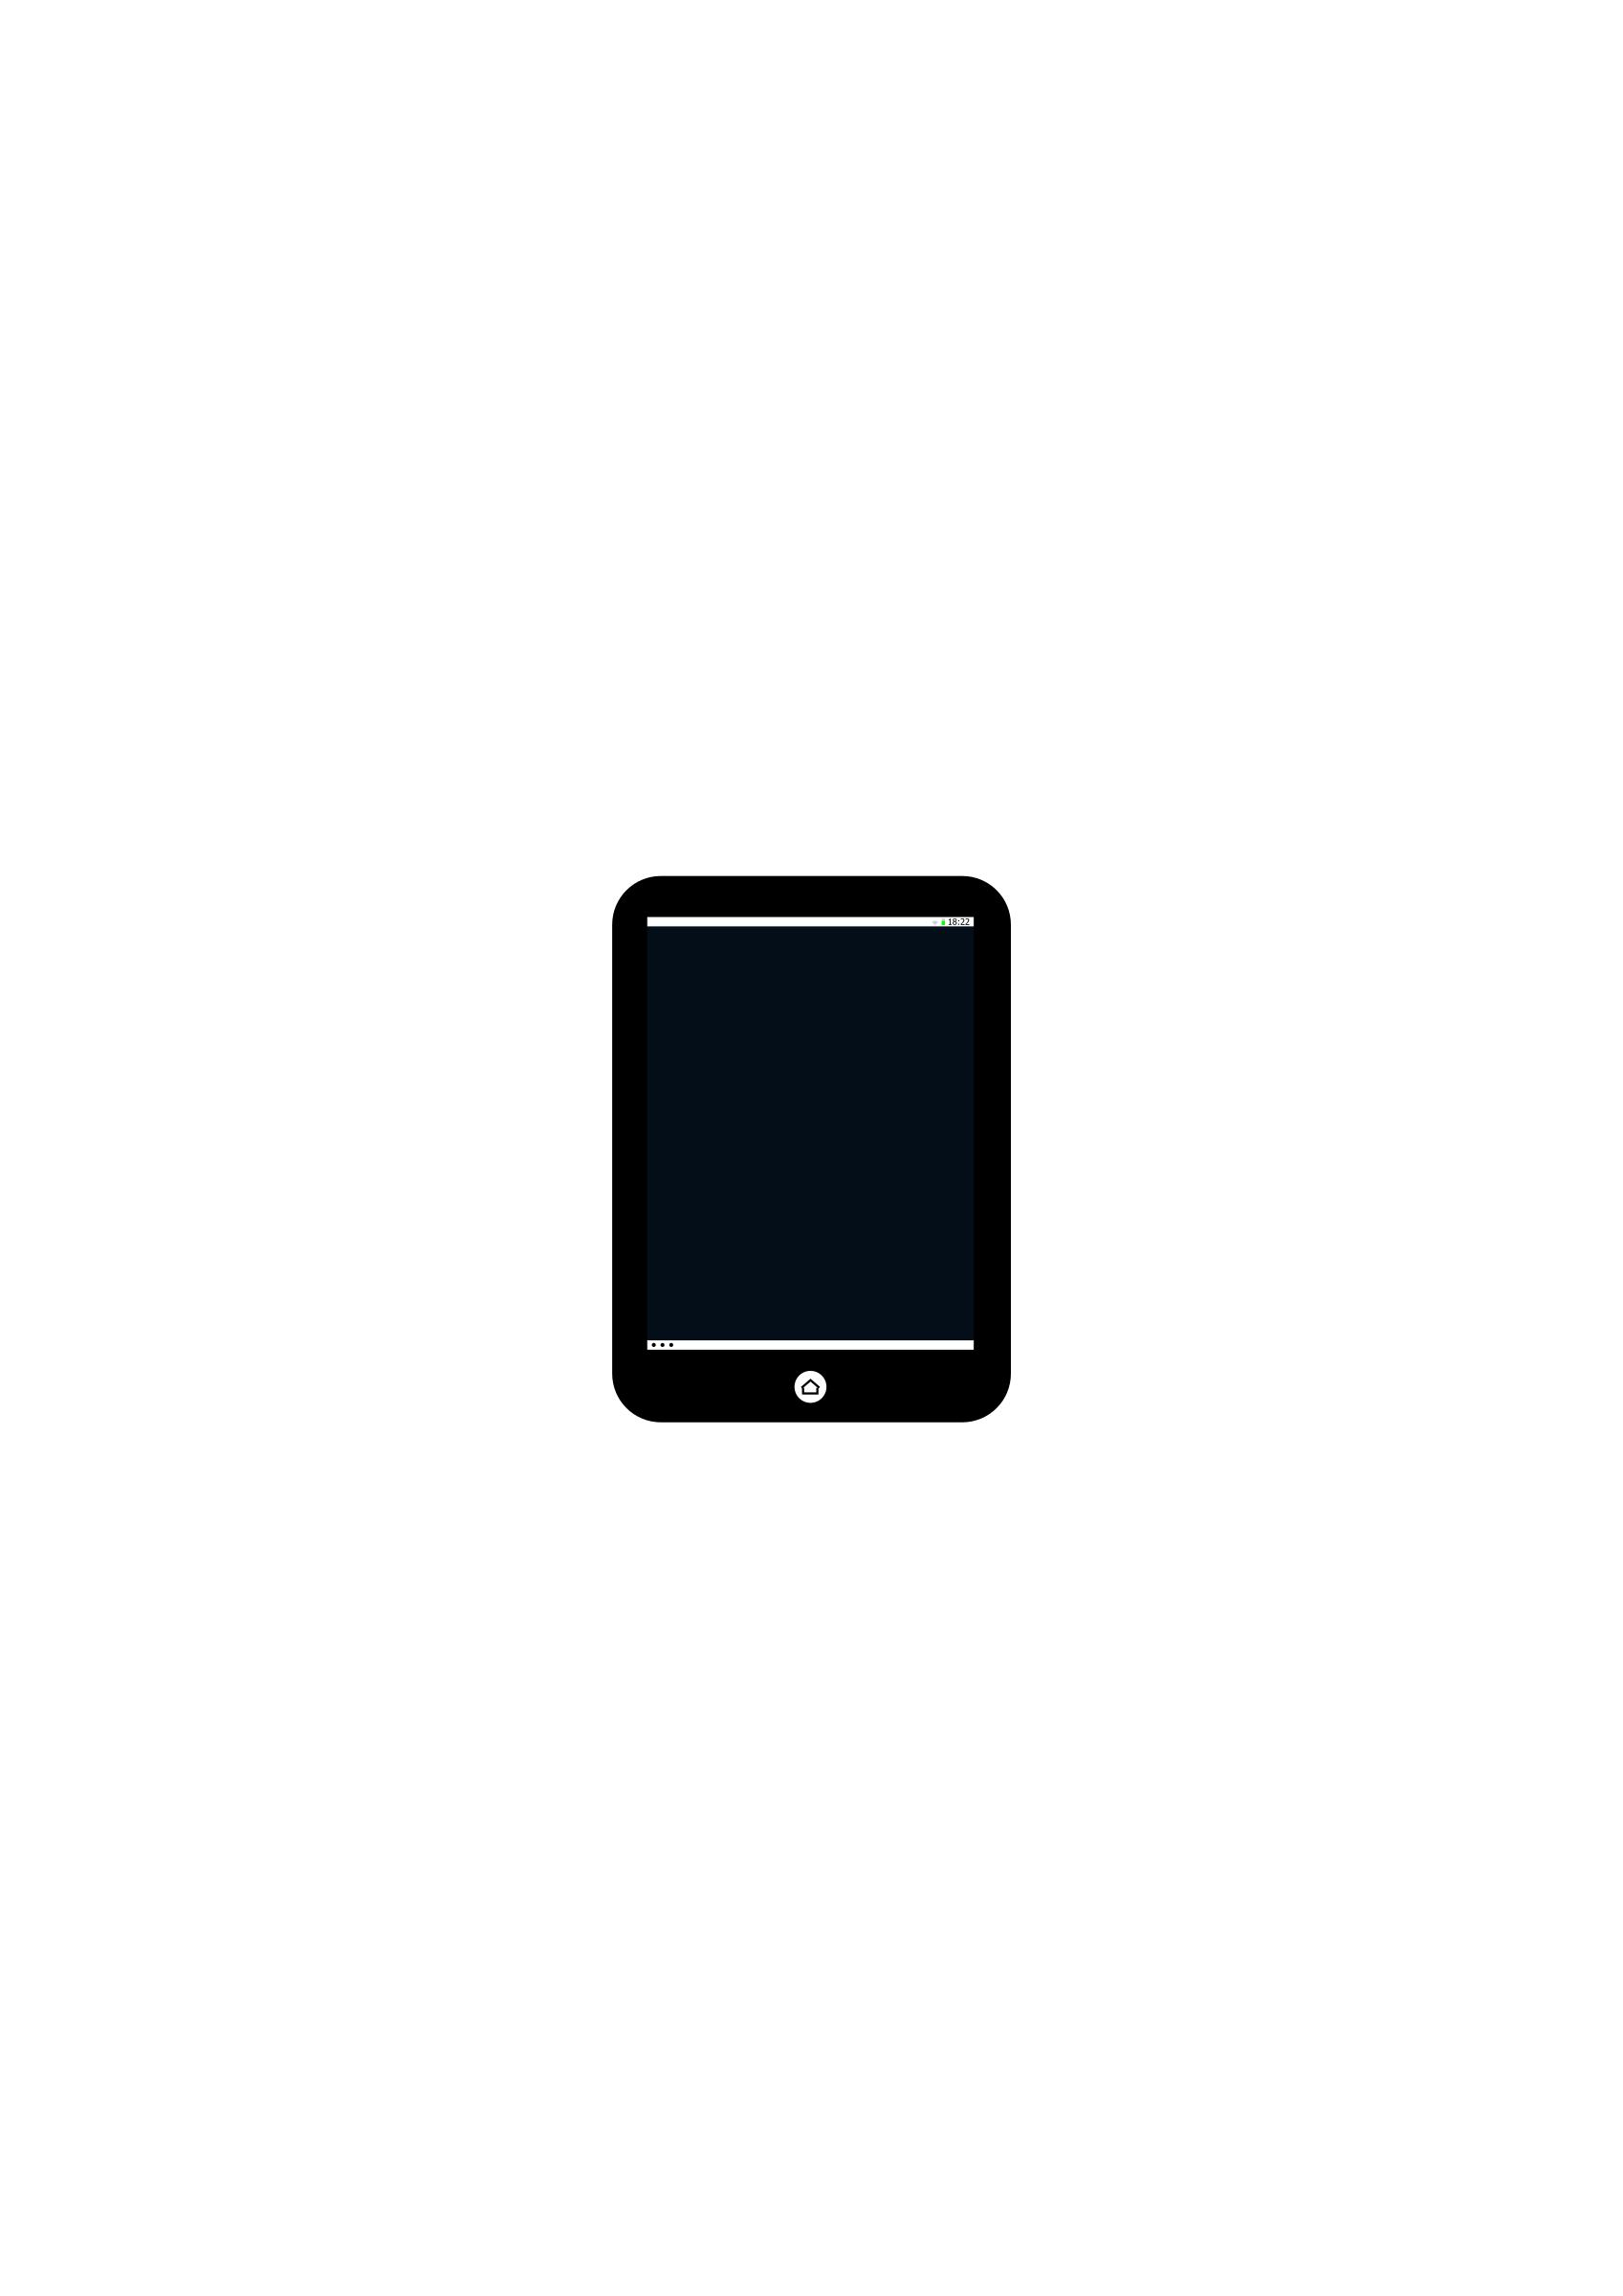 Tablet display color and status bar png